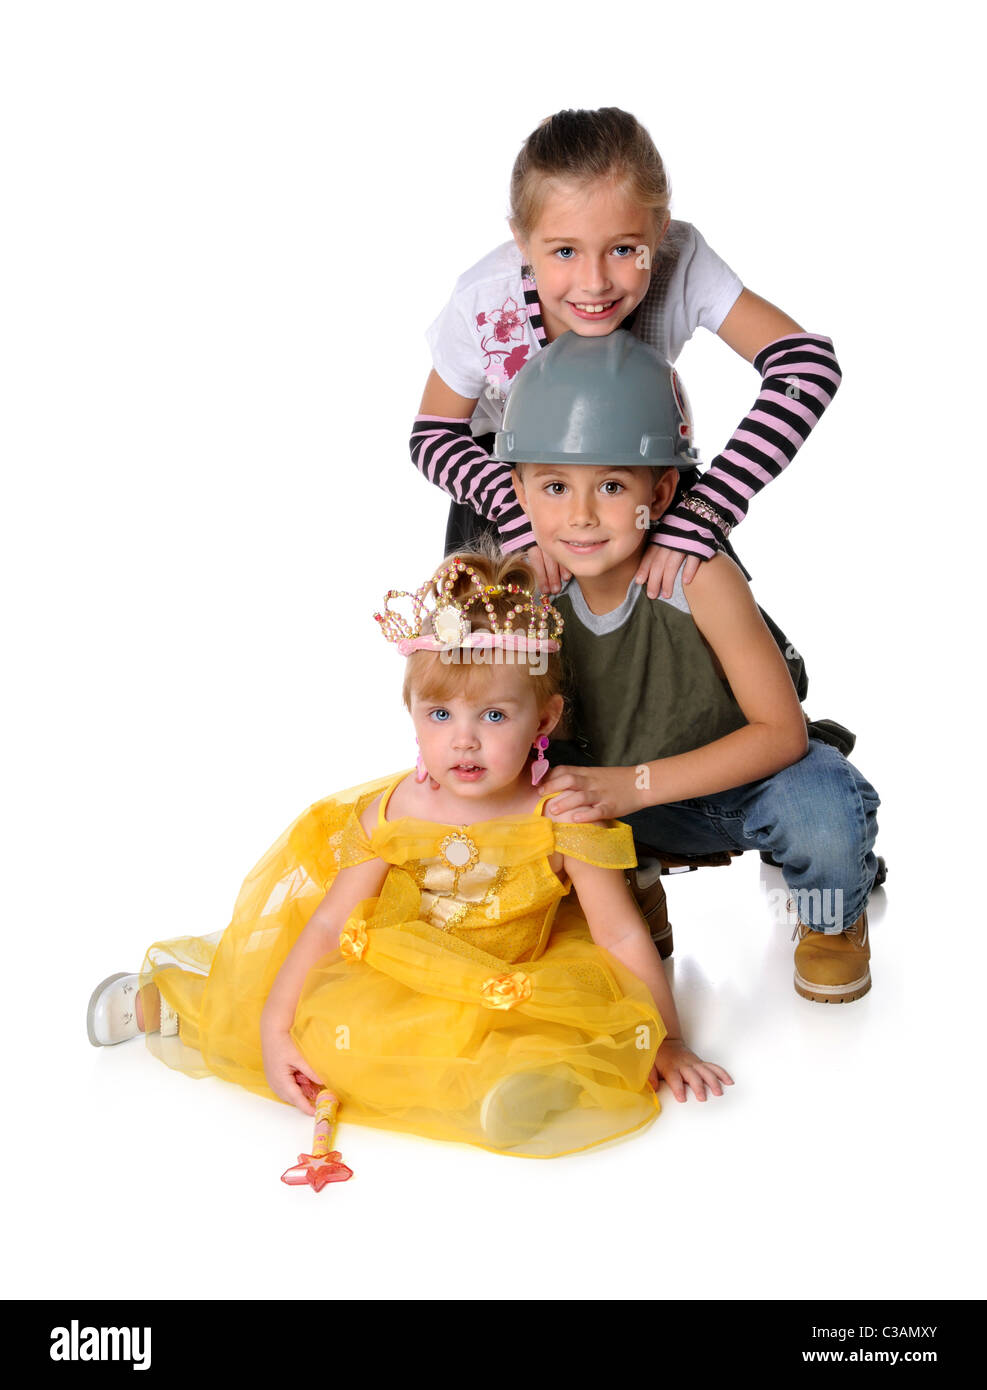 Young children dressed in costumes isolated over white background Stock Photo